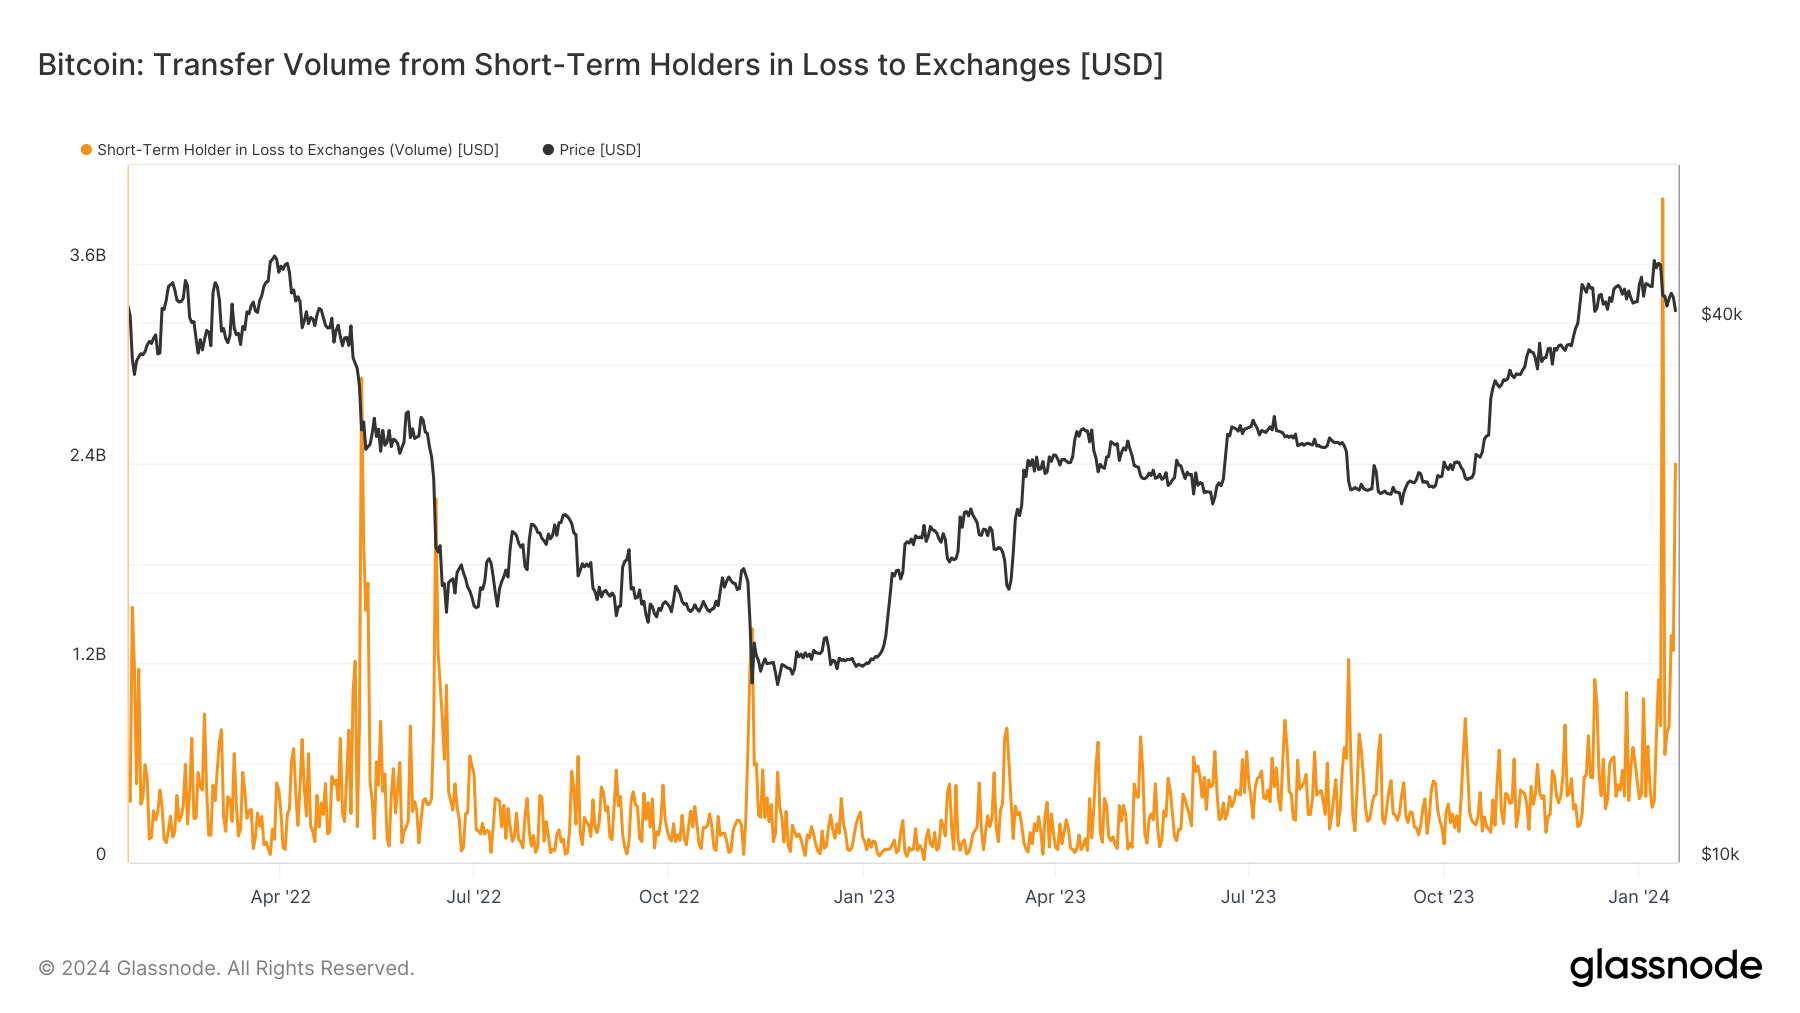 Long-term Bitcoin holders start to cash in as short-term investors face losses